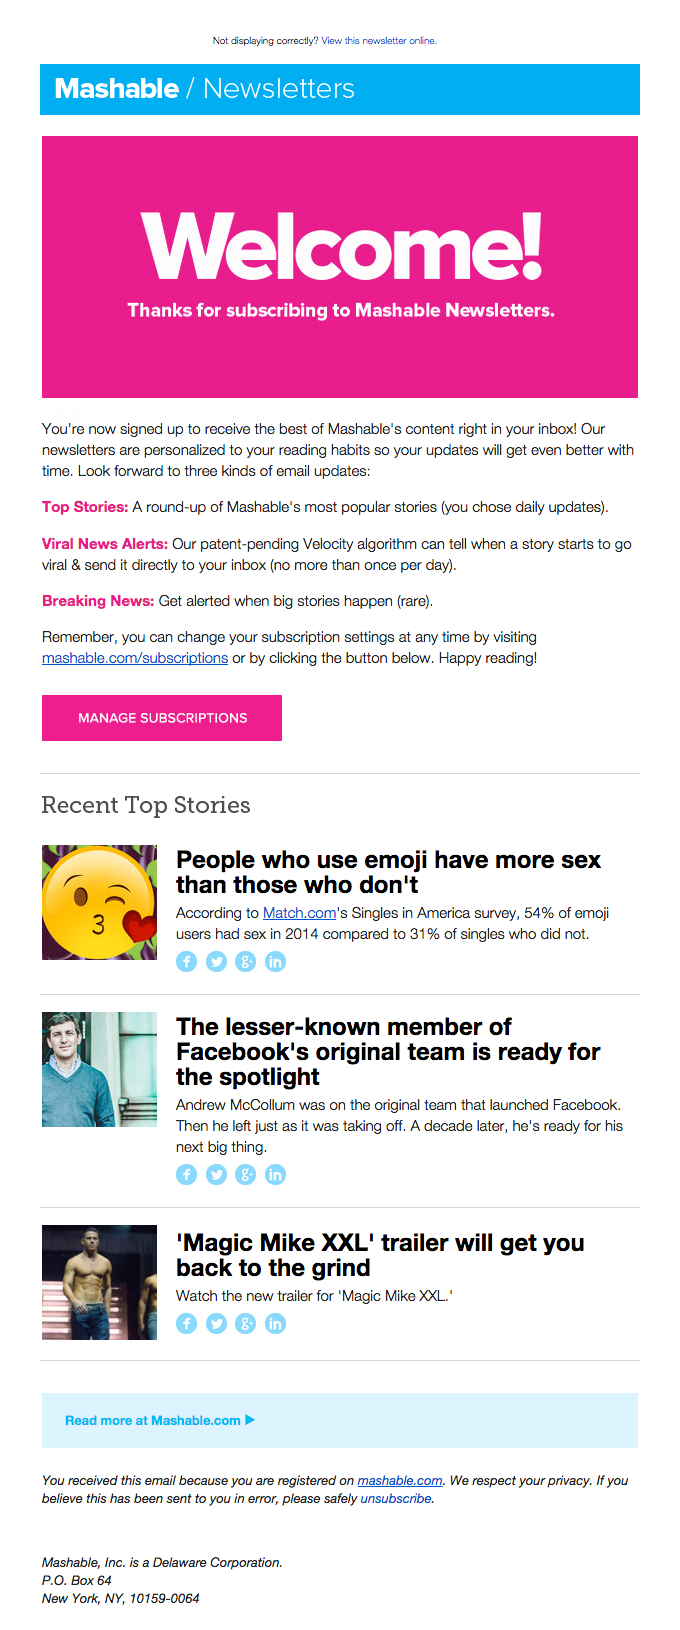 Welcome to Mashable Newsletters!